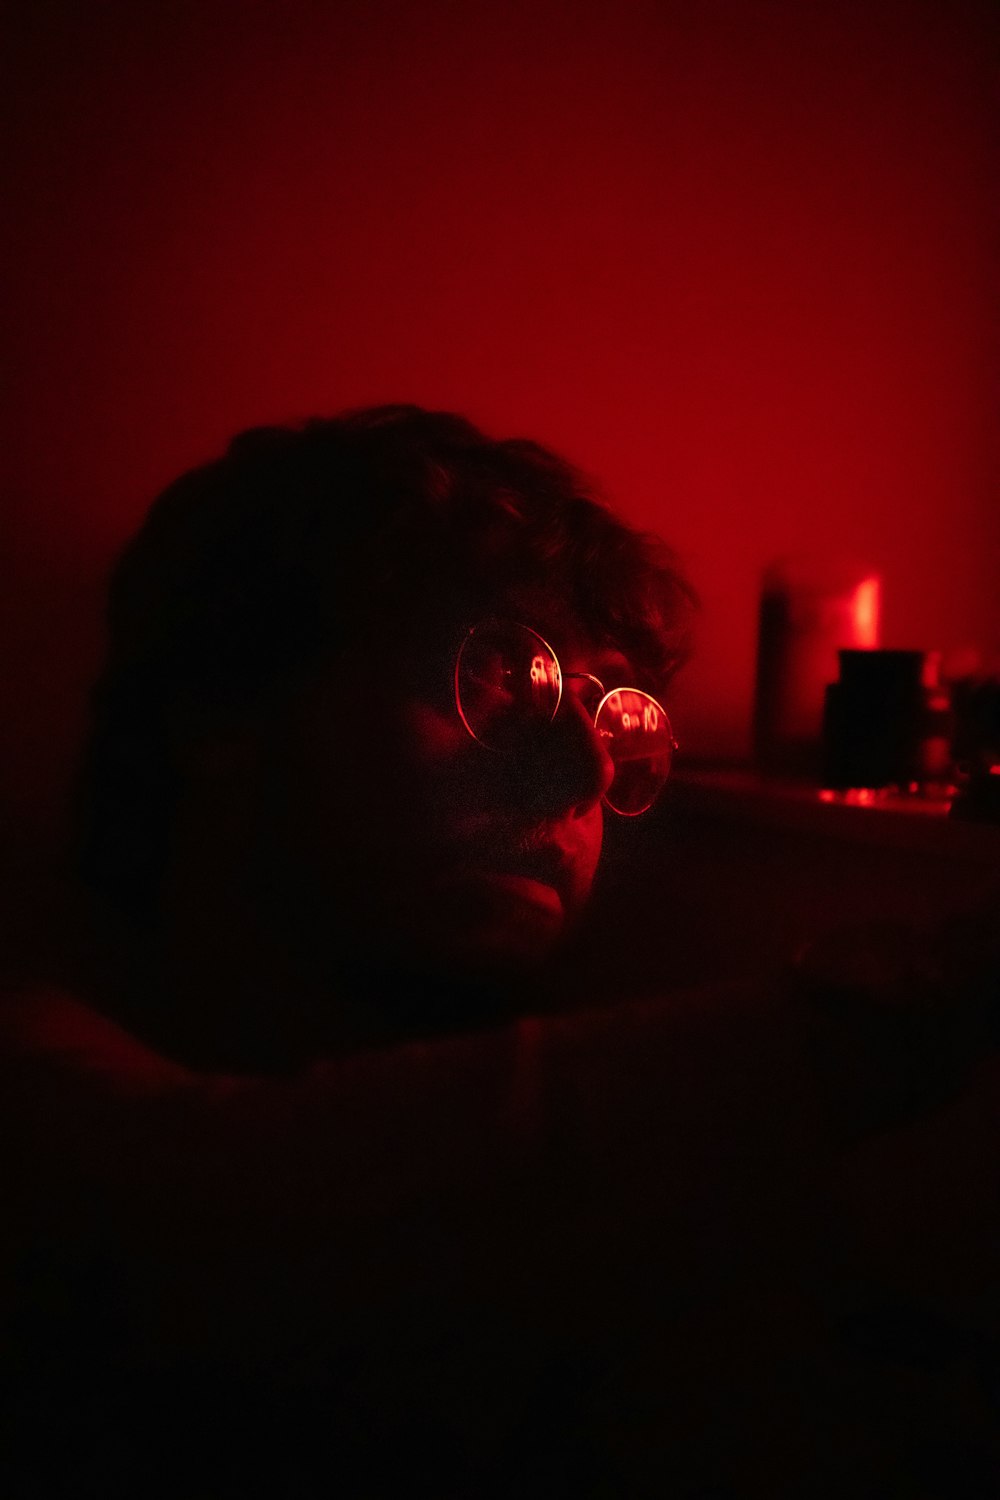 a person wearing glasses in a dark room